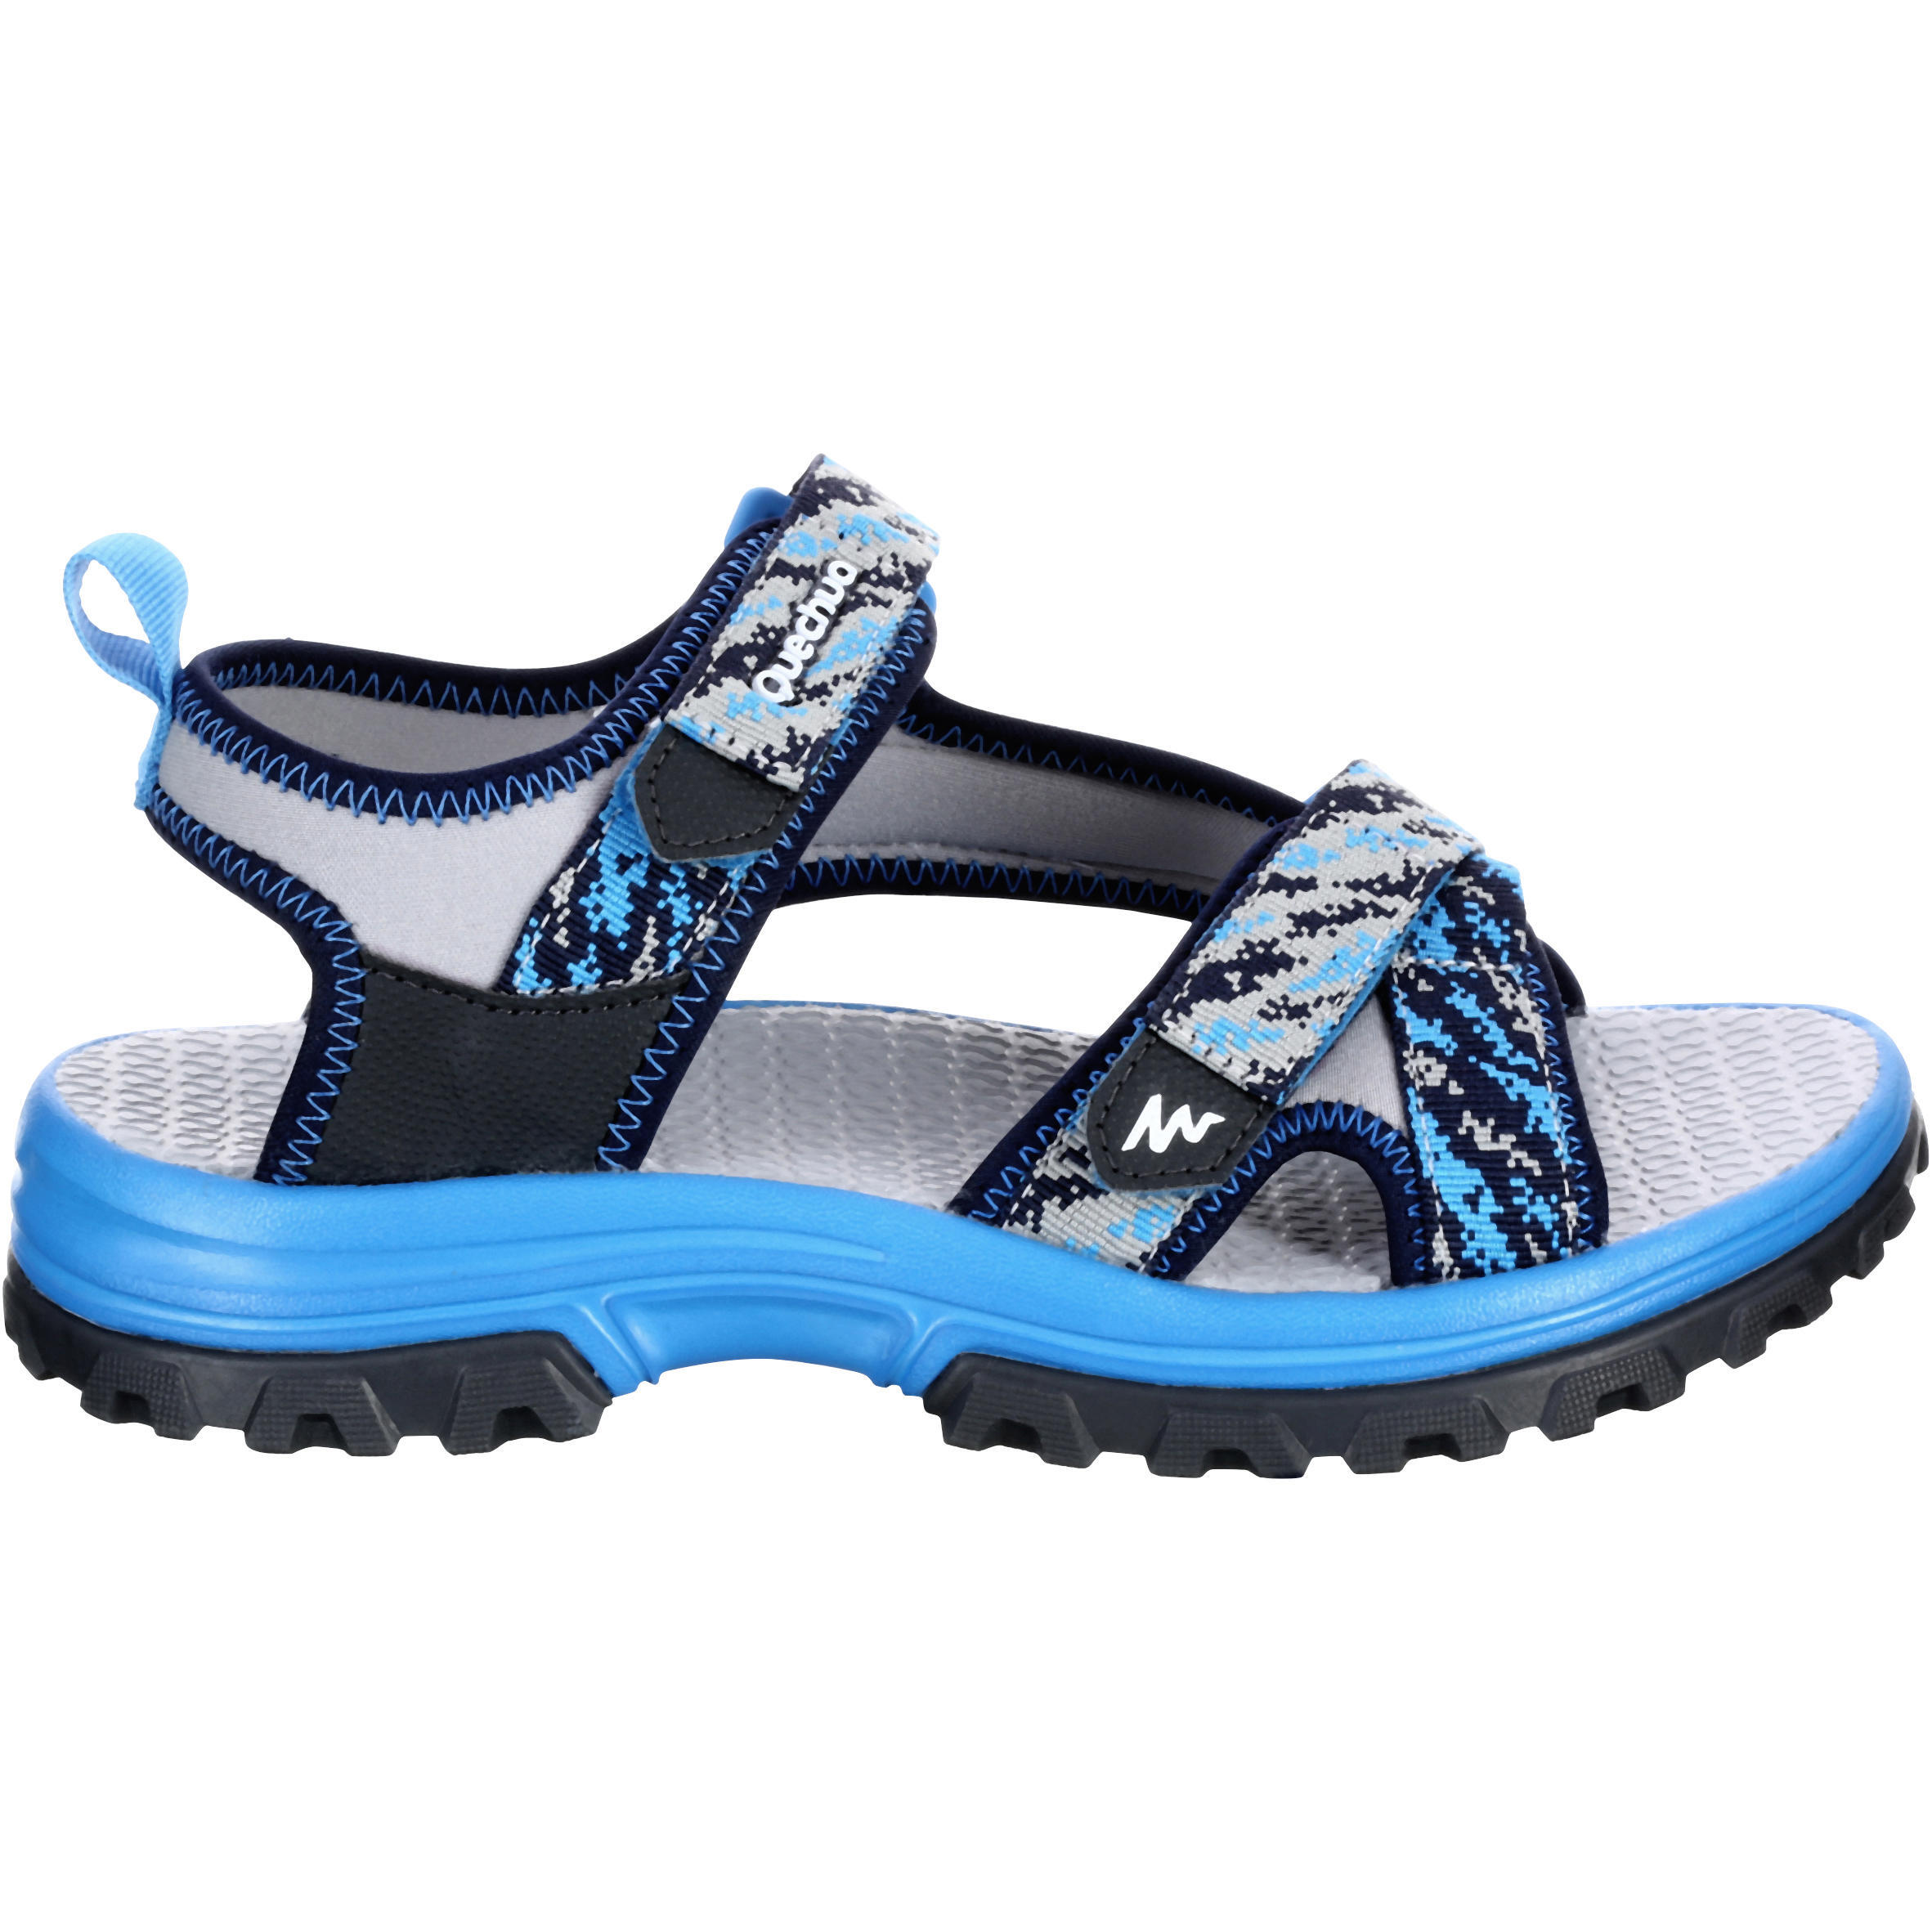 Kids’ Hiking Sandals MH120 TW  - Jr size 10 TO Adult size 6 - Blue 2/7